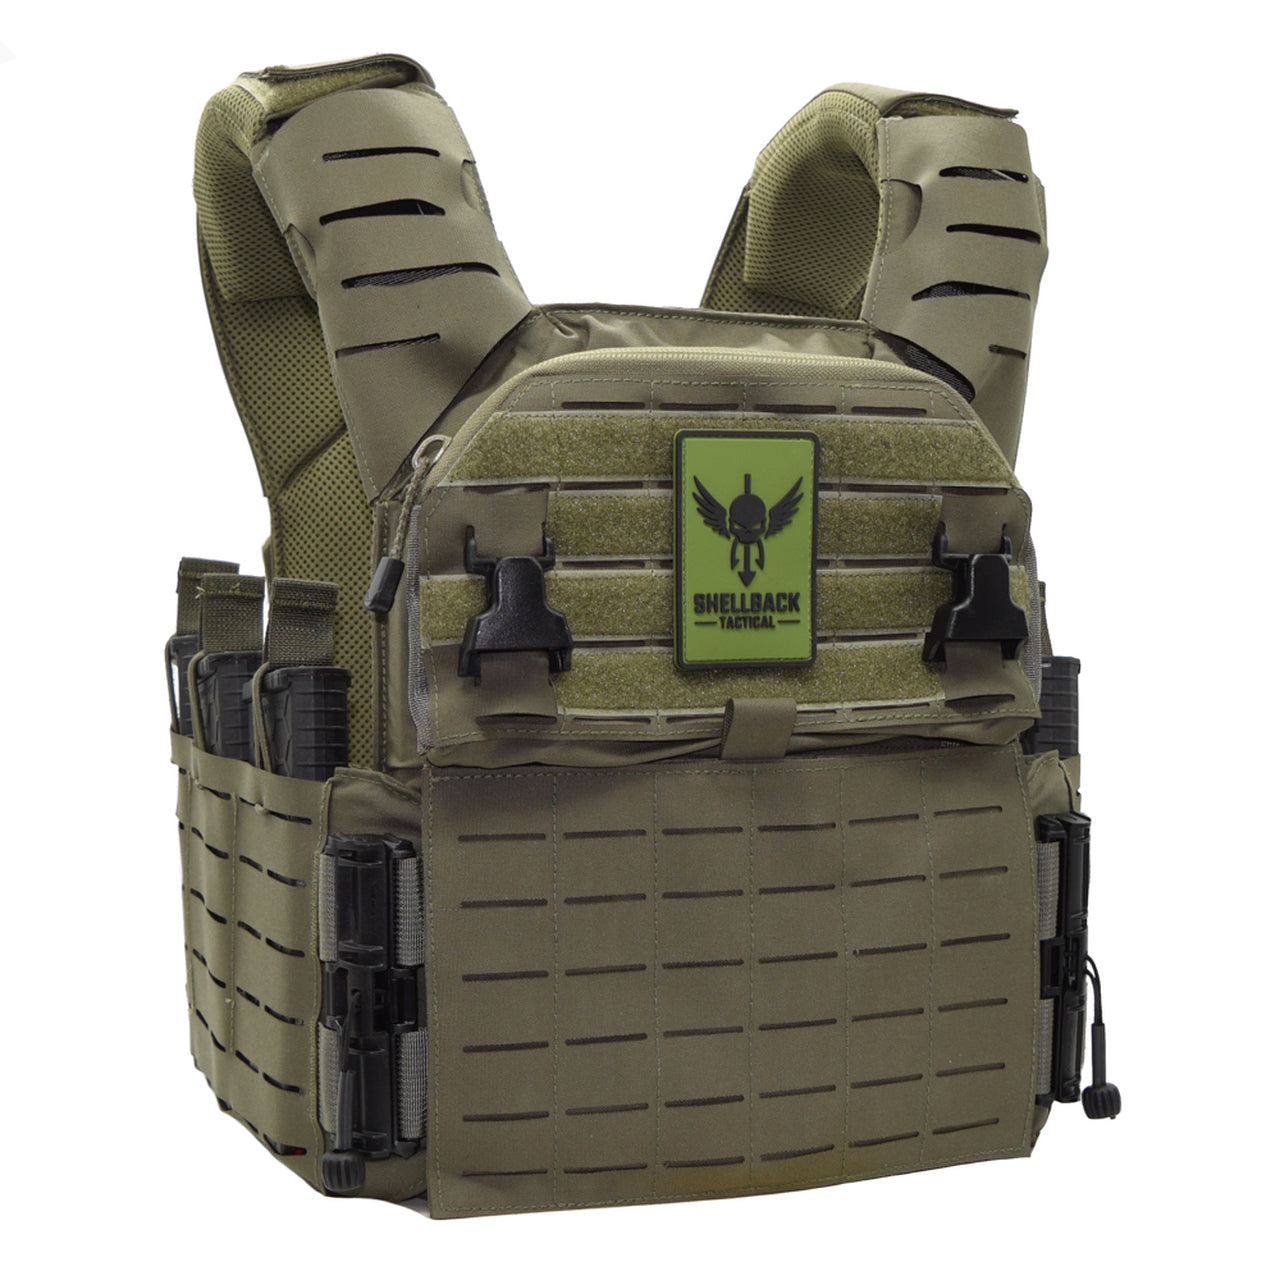 A Shellback Tactical Banshee Elite 3.0 Plate Carrier with a green logo on it.